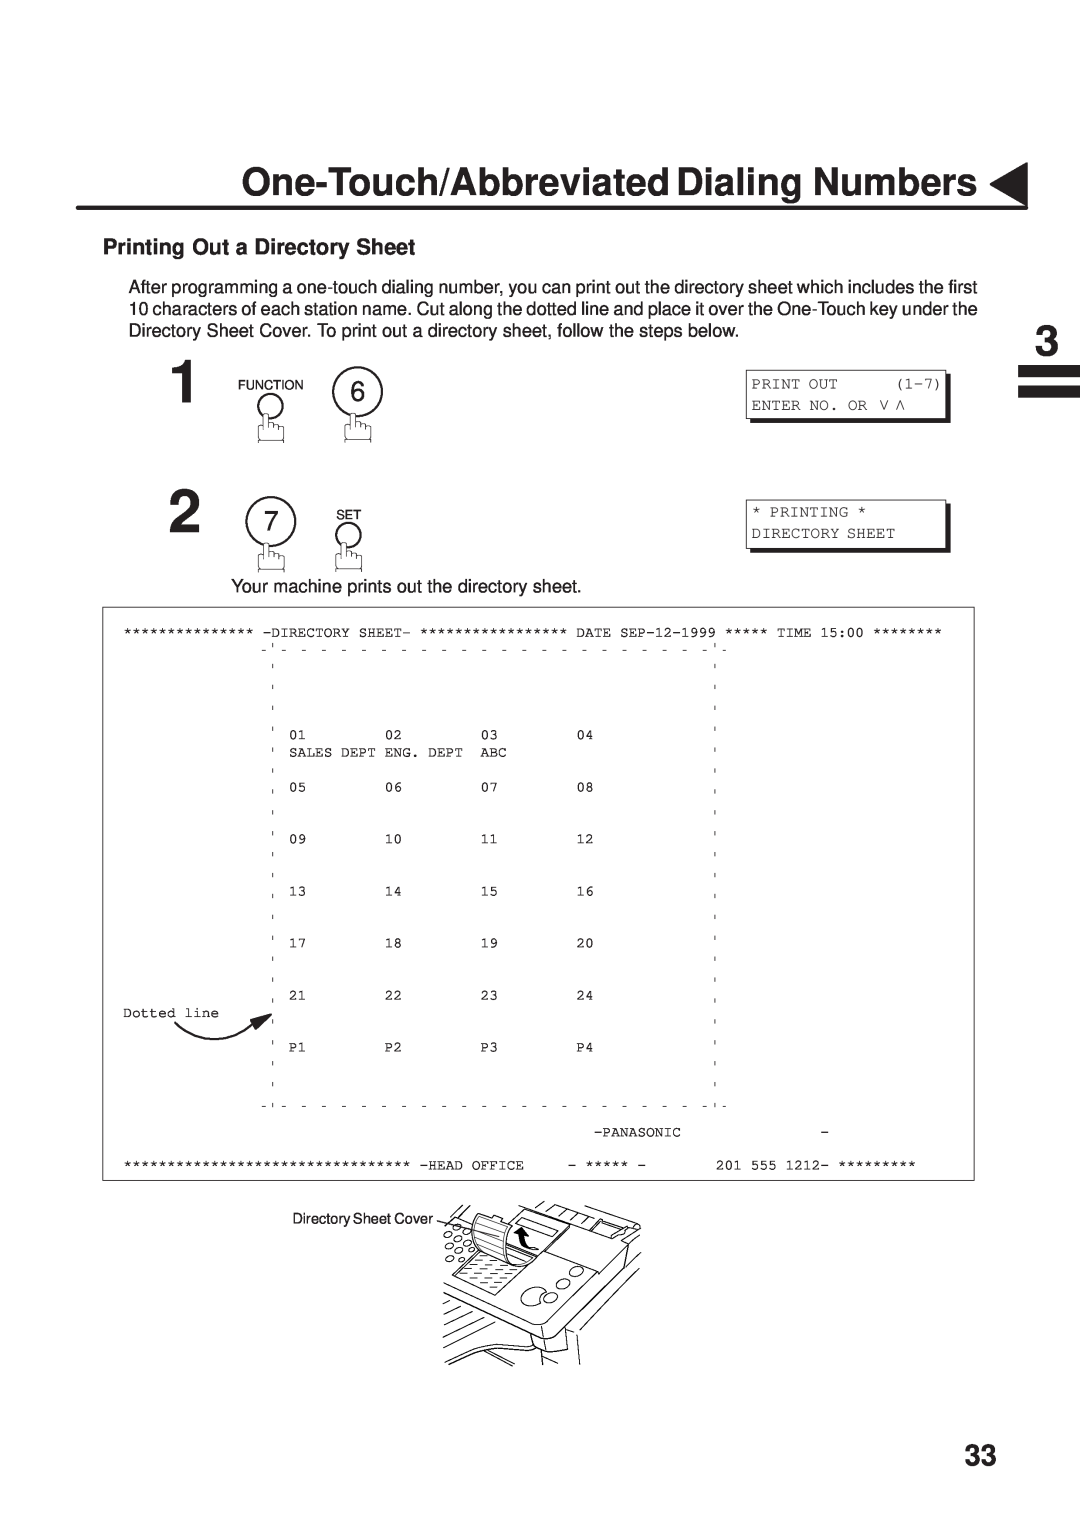 Panasonic UF-333 manual Printing Out a Directory Sheet, One-Touch/Abbreviated Dialing Numbers 